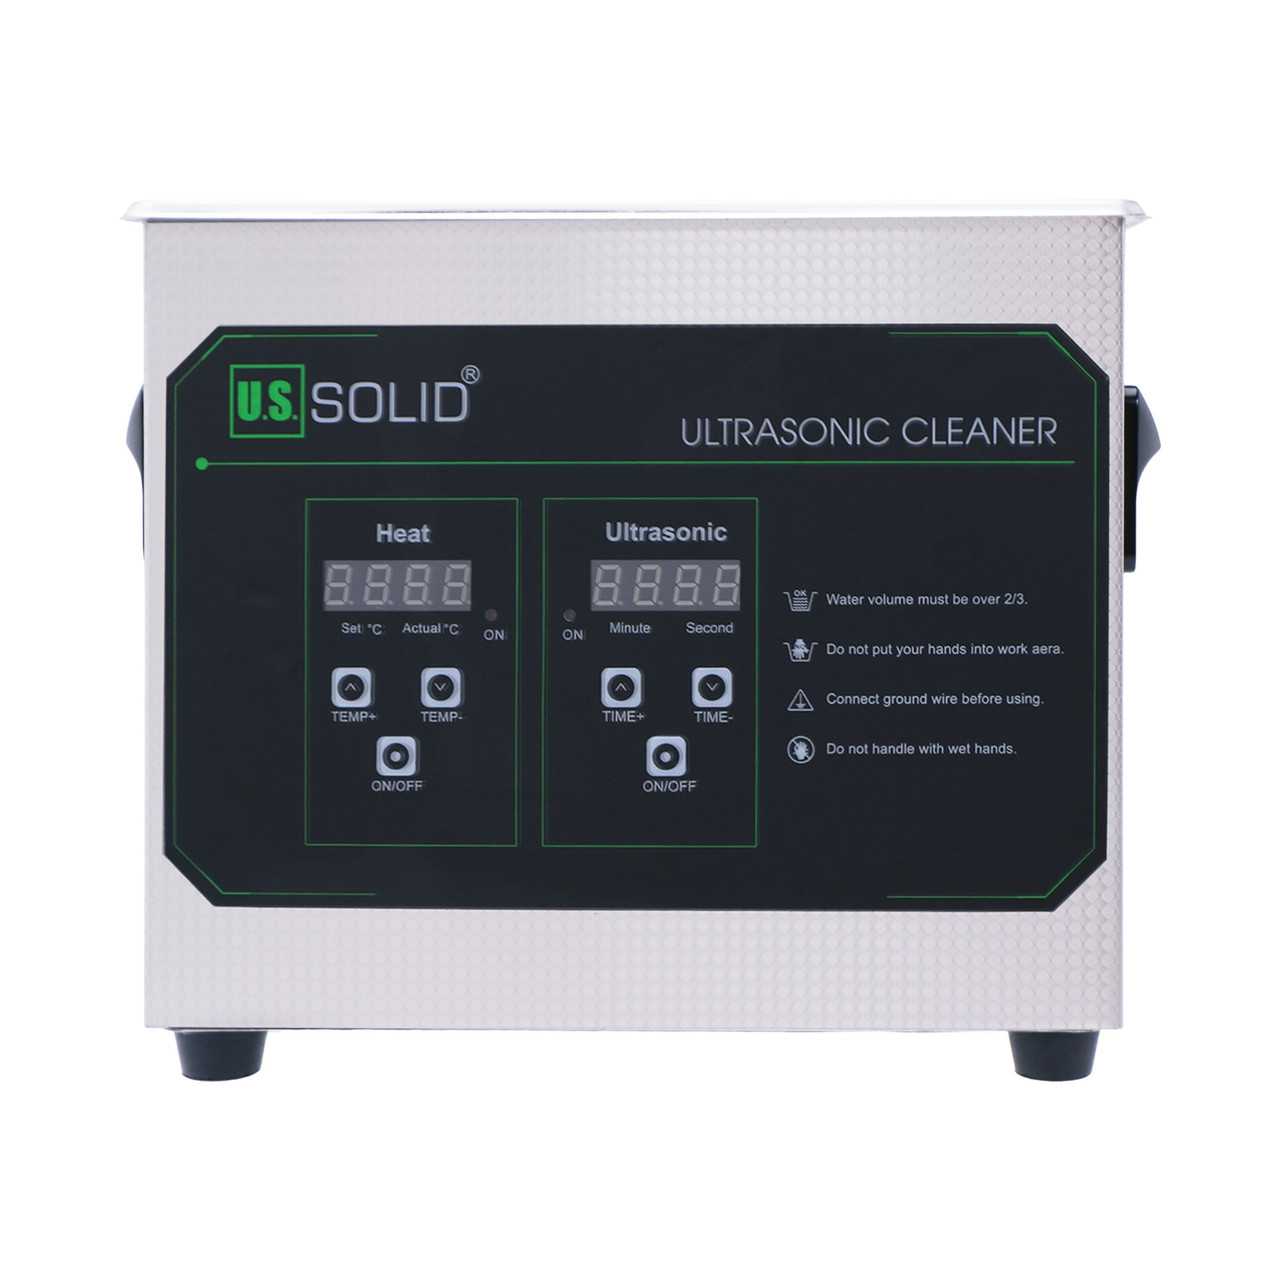 U.S. Solid 10 L Ultrasonic Cleaner, 40 kHz Stainless Steel Ultrasonic Cleaning Machine with Digital Timer and Heater